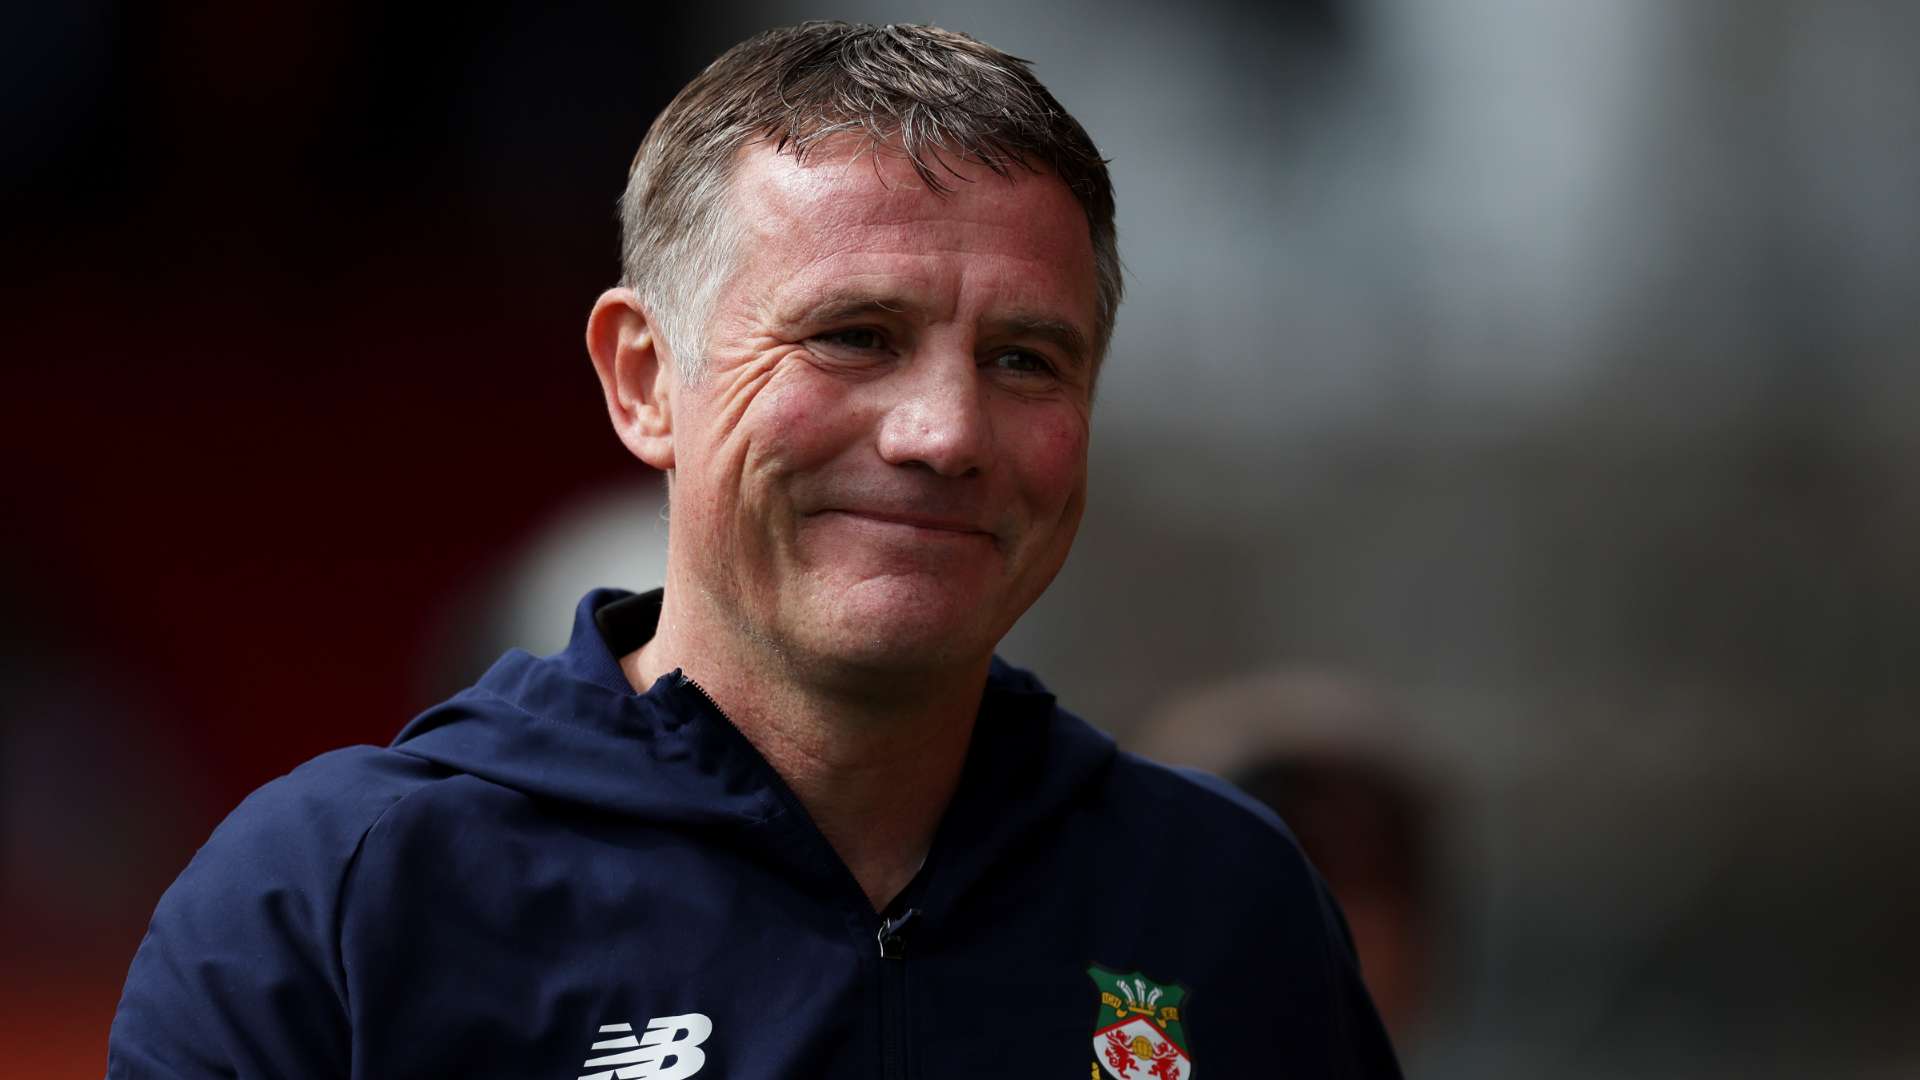 Wrexham manager Phil Parkinson throws gauntlet down to owners Ryan Reynolds & Rob McElhenney as he insists he only wants his top transfer targets | Goal.com